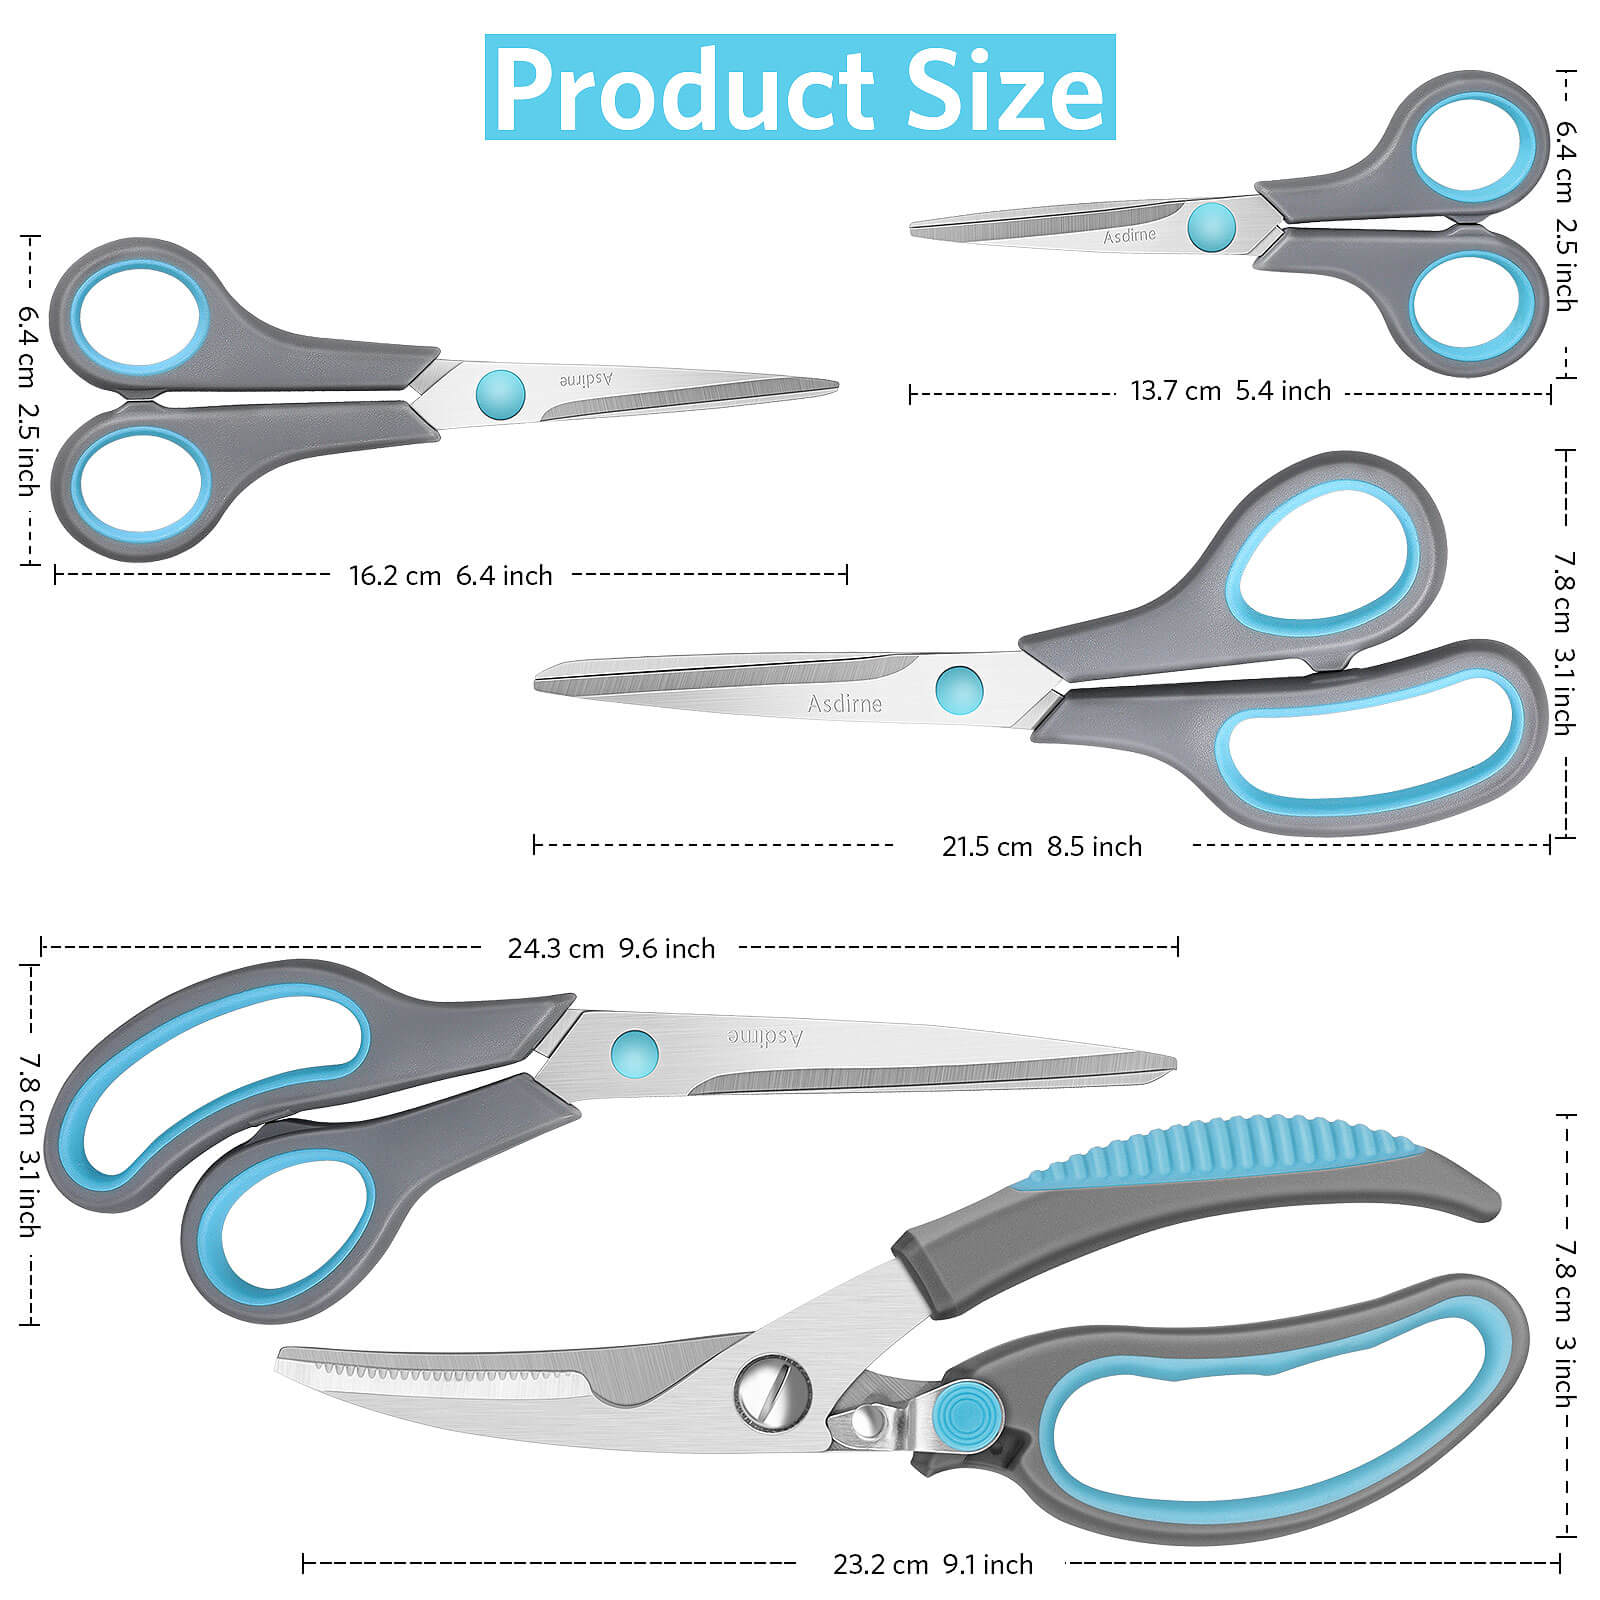  Asdirne Premium sewing Scissors Bundle, Perfect Sewing  Partners, Sharp and Durable, Comfortable Handle, Contains 9”Fabric  scissors, 5”Detail Scissors, 3.9”Embroidery Scissors, 4.8”Thread Snips :  Arts, Crafts & Sewing